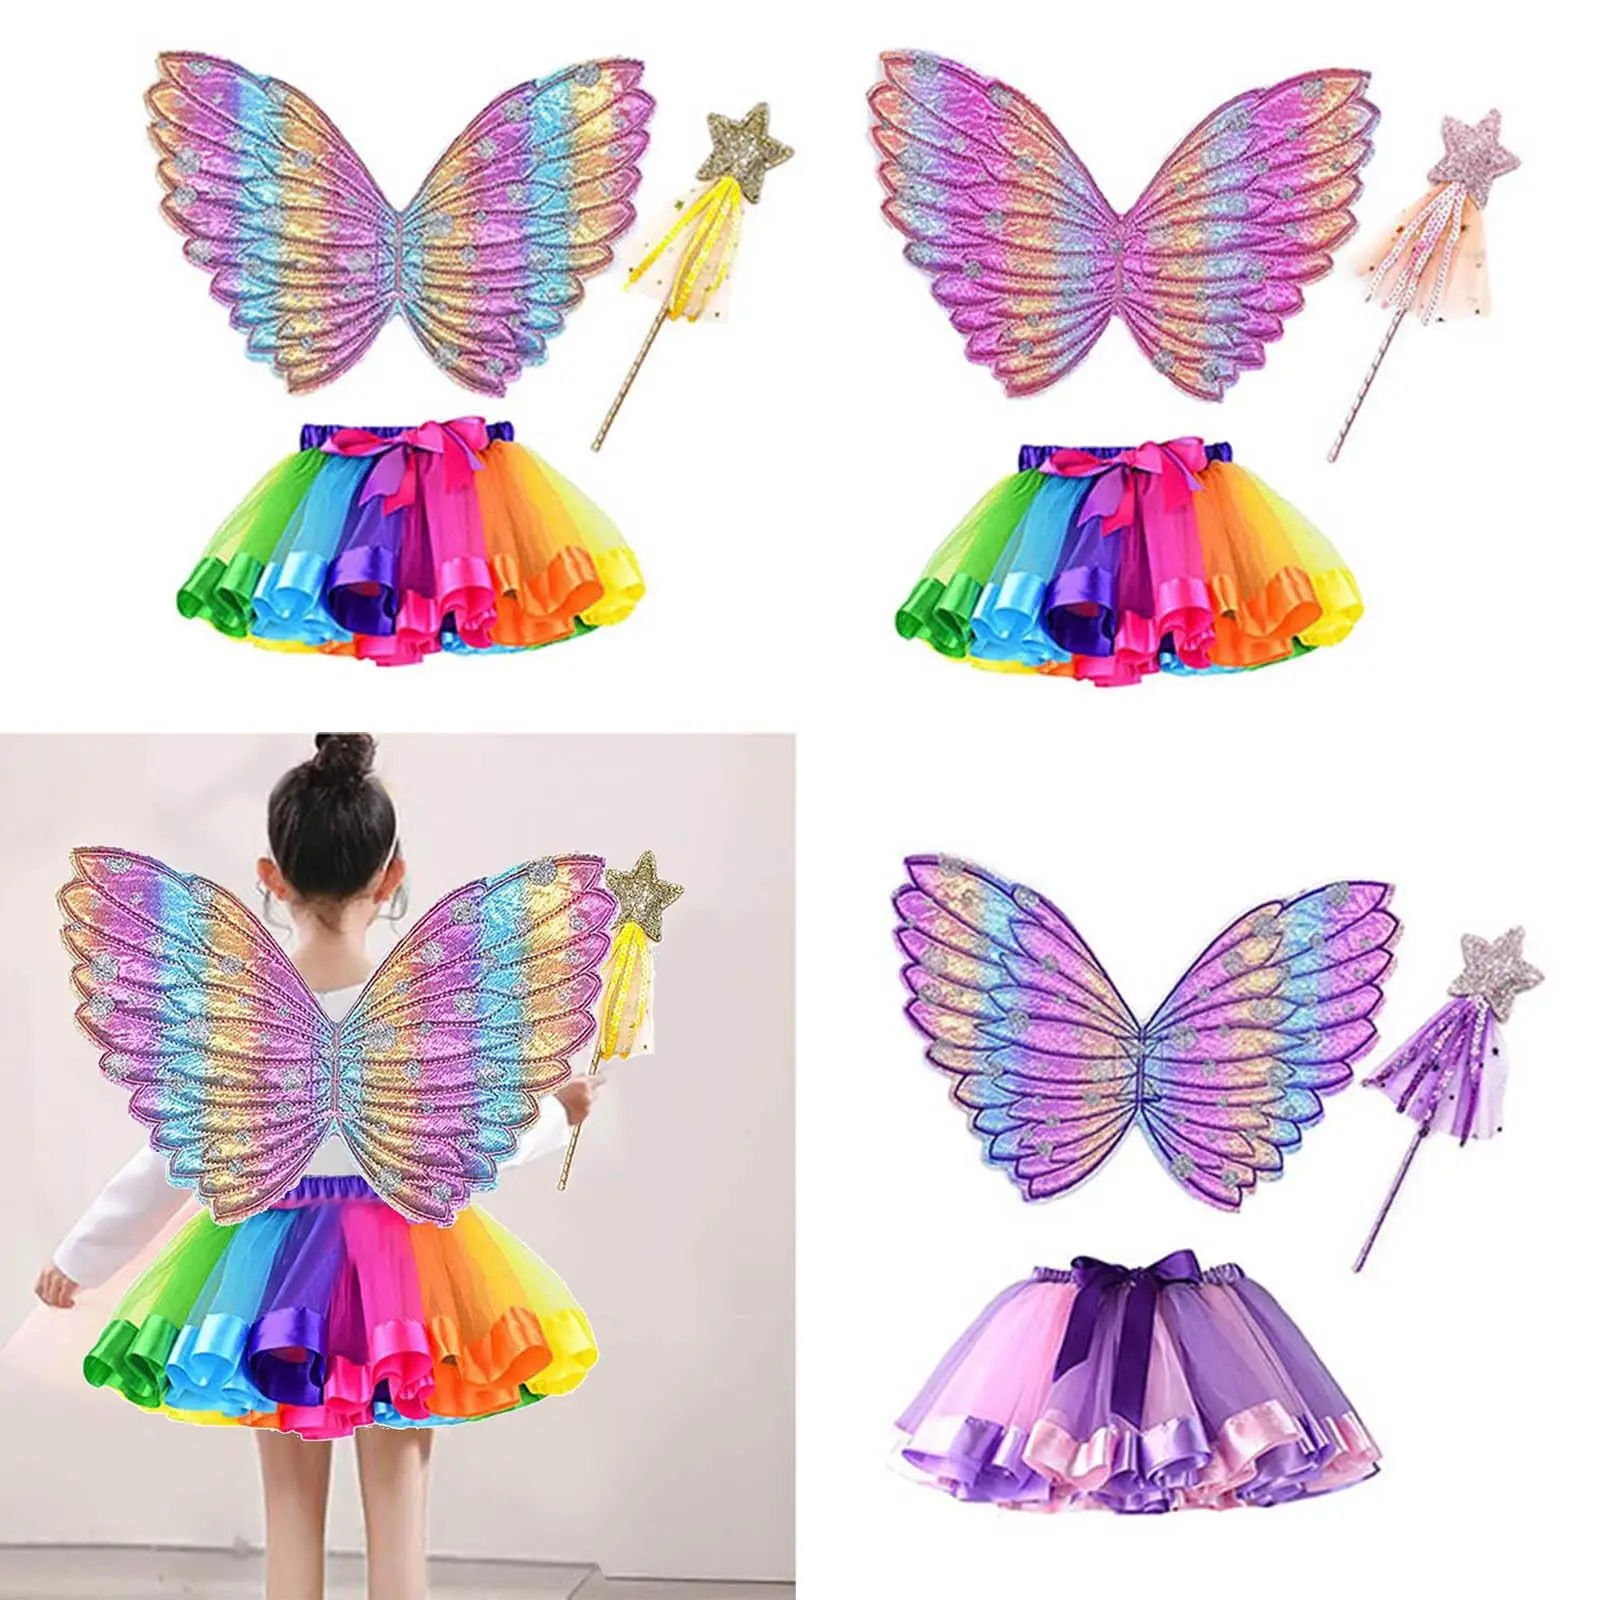 Girls Fairy Costume Tutu Dress Princess Cosplay Christmas Party Fancy Dress Up Role Play Outfits Photo Props